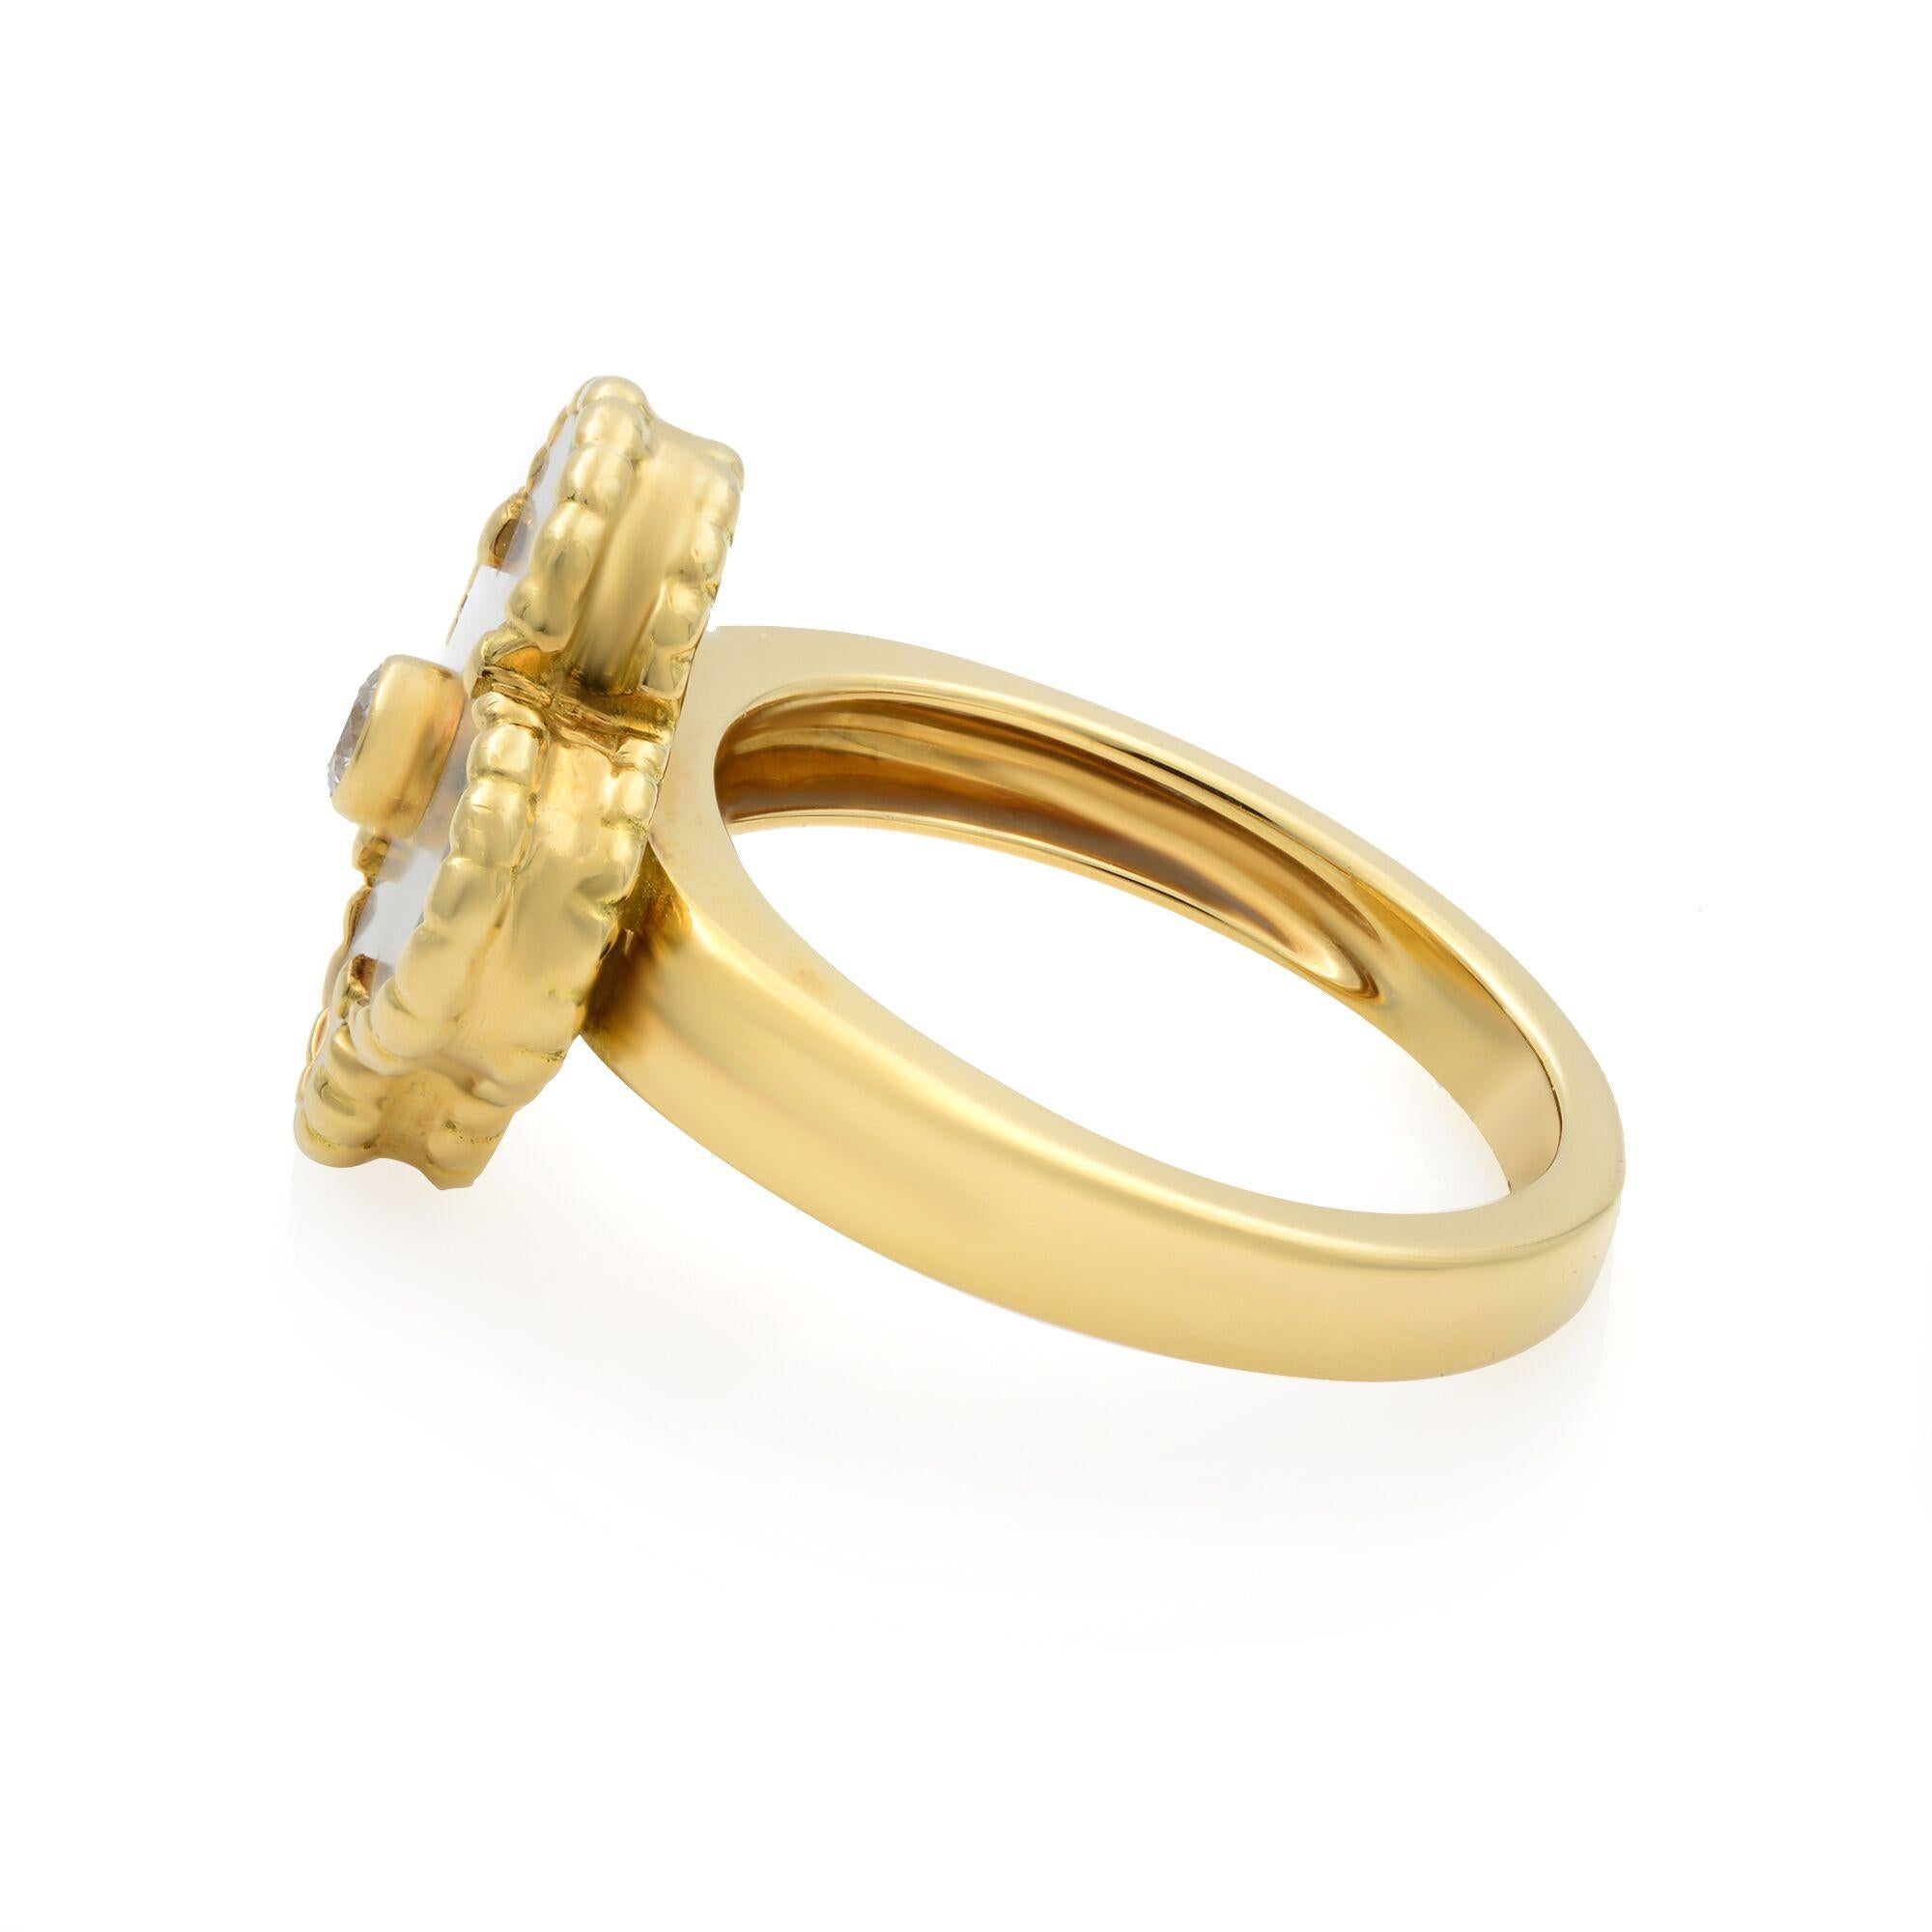 Van Cleef & Arpels Vintage Alhambra ring, crafted in 18K yellow gold. Set with mother of pearl top and 0.06ct diamond, VVS clarity and F-G color. Ring Size: 4.75.
Condition: pre-owned like new, comes without original box ans no papers. 